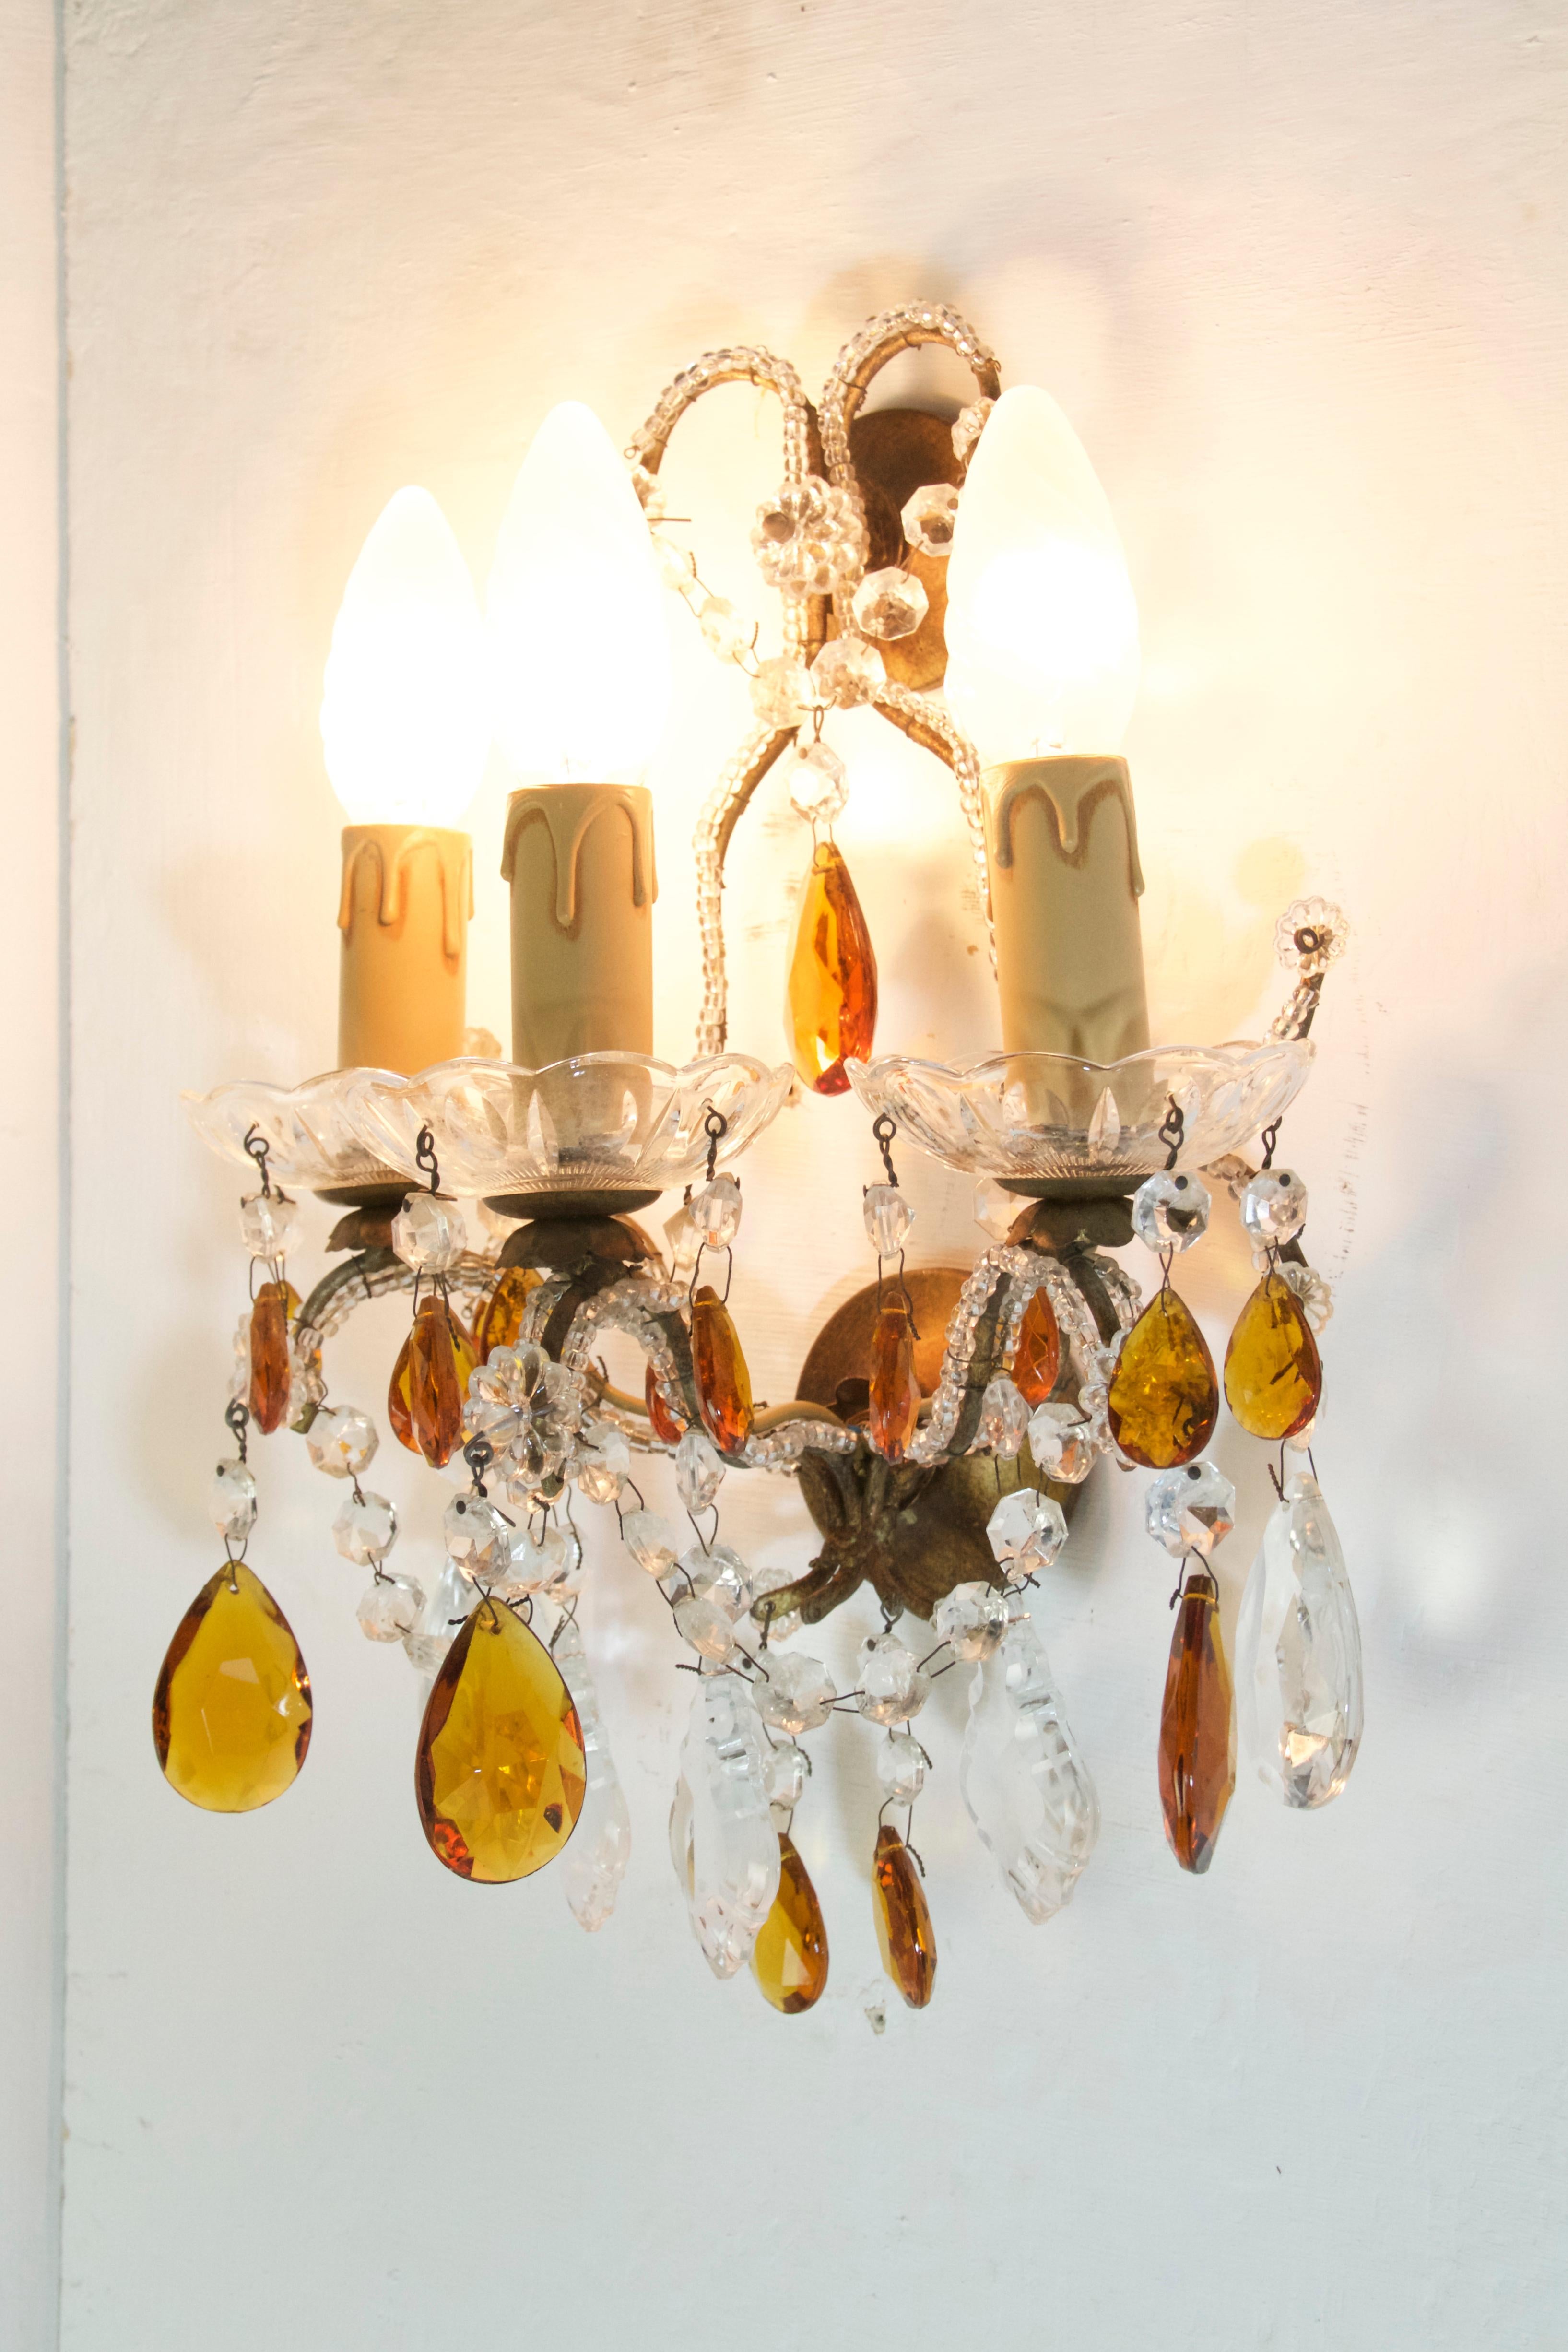 Two sets with two pairs in each set of wall sconces in the manner of Maison Baguès. Each sconce has three candle style bulb holders and is decorated with clear and amber colored crystals and glass. The sconces are made from iron and painted in gold